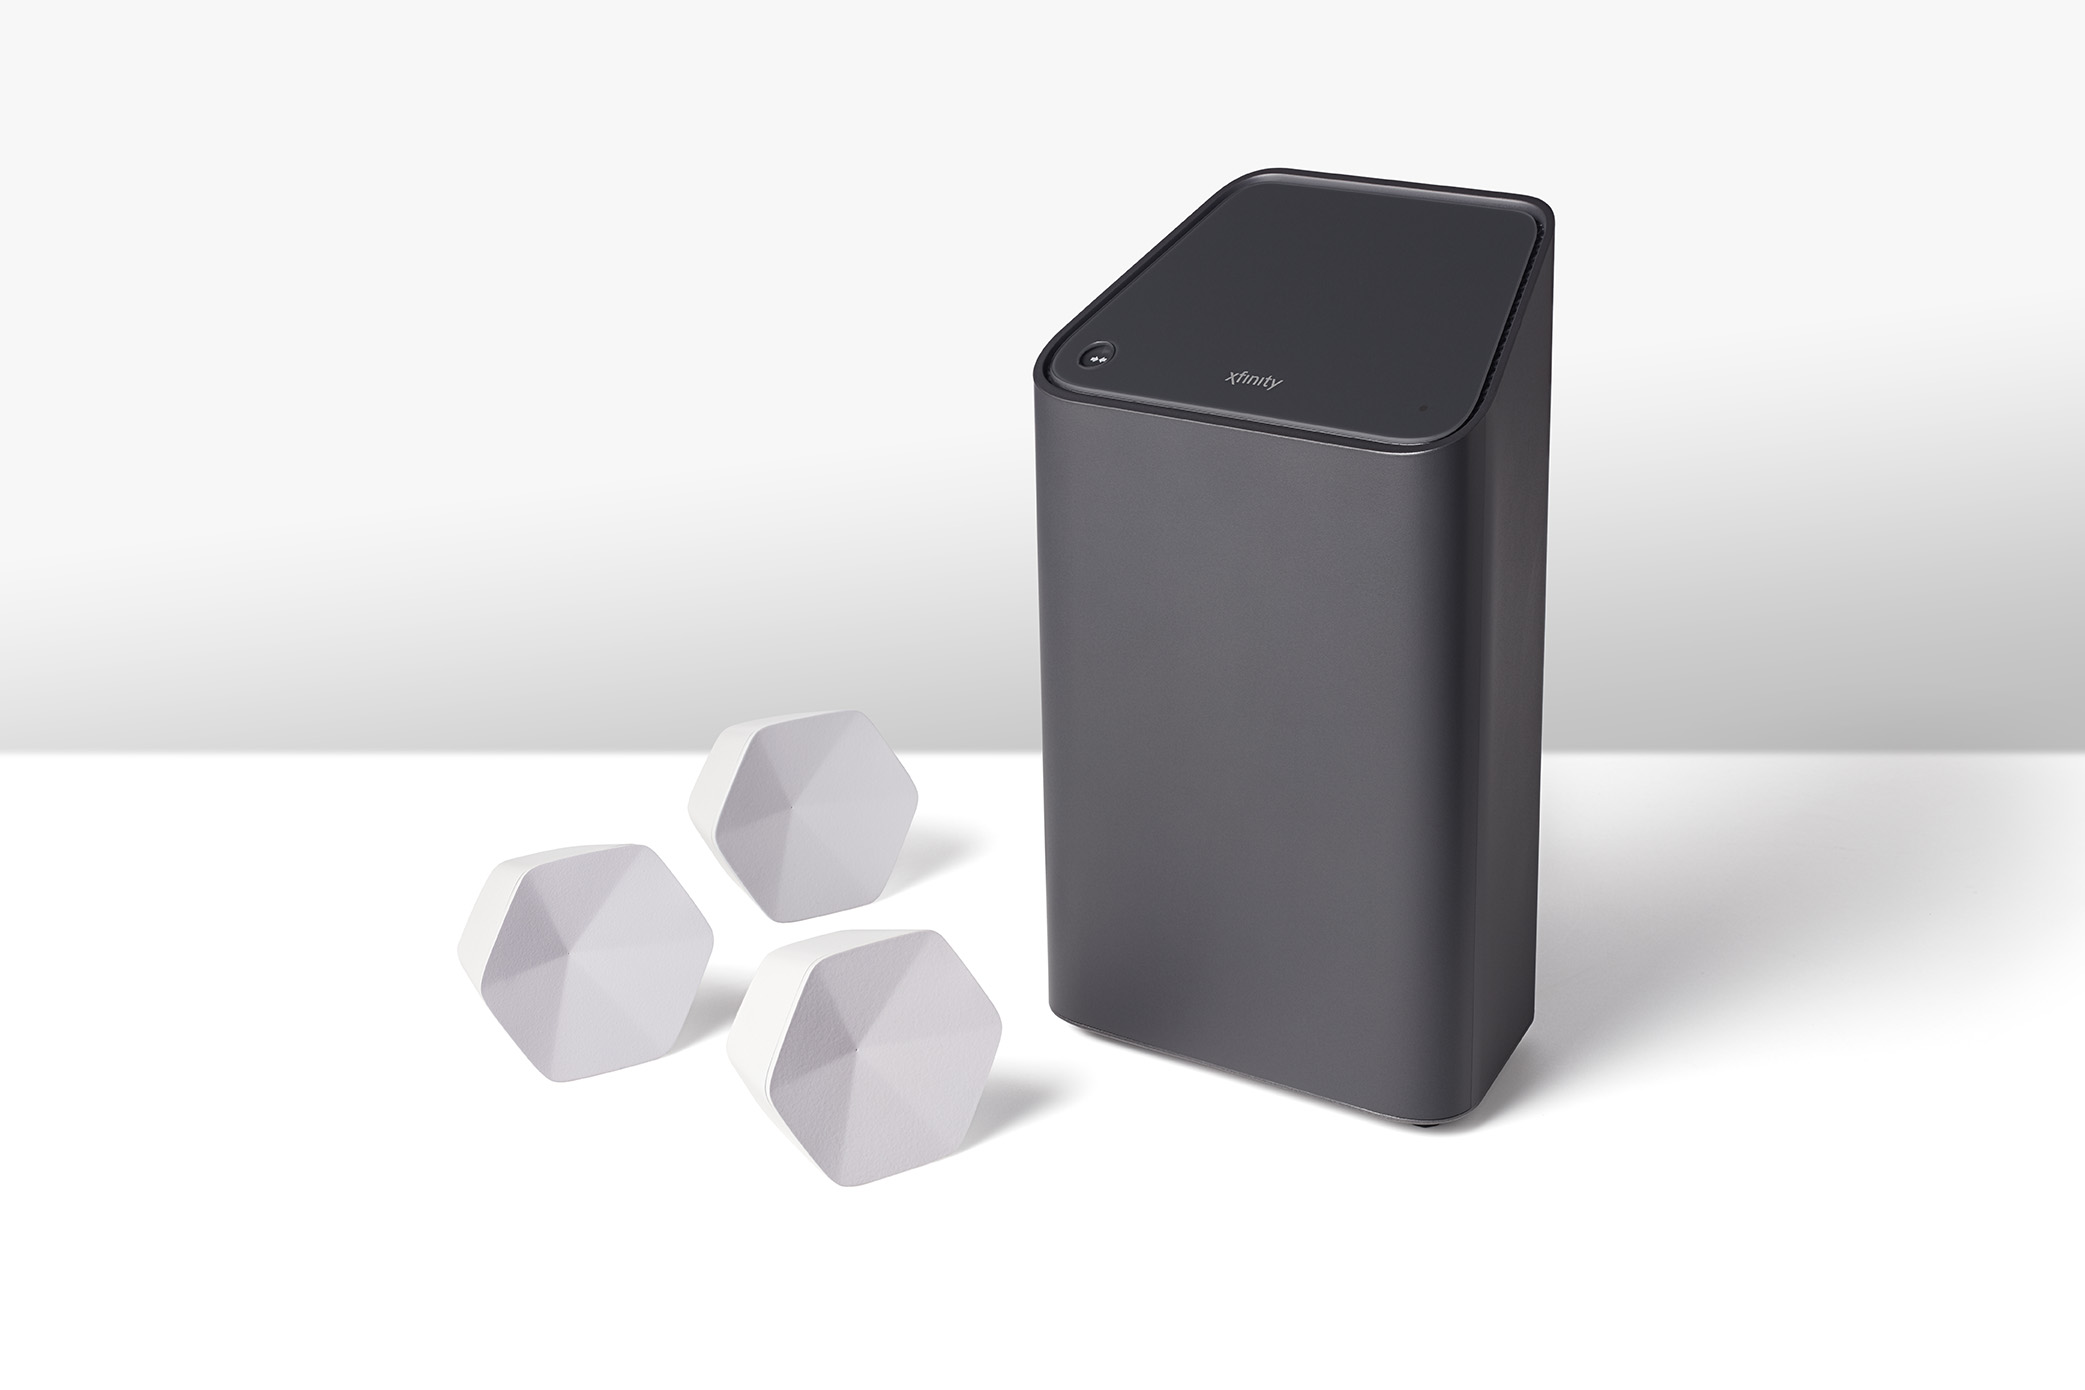 xFi Gateway and Pods Product Imagery